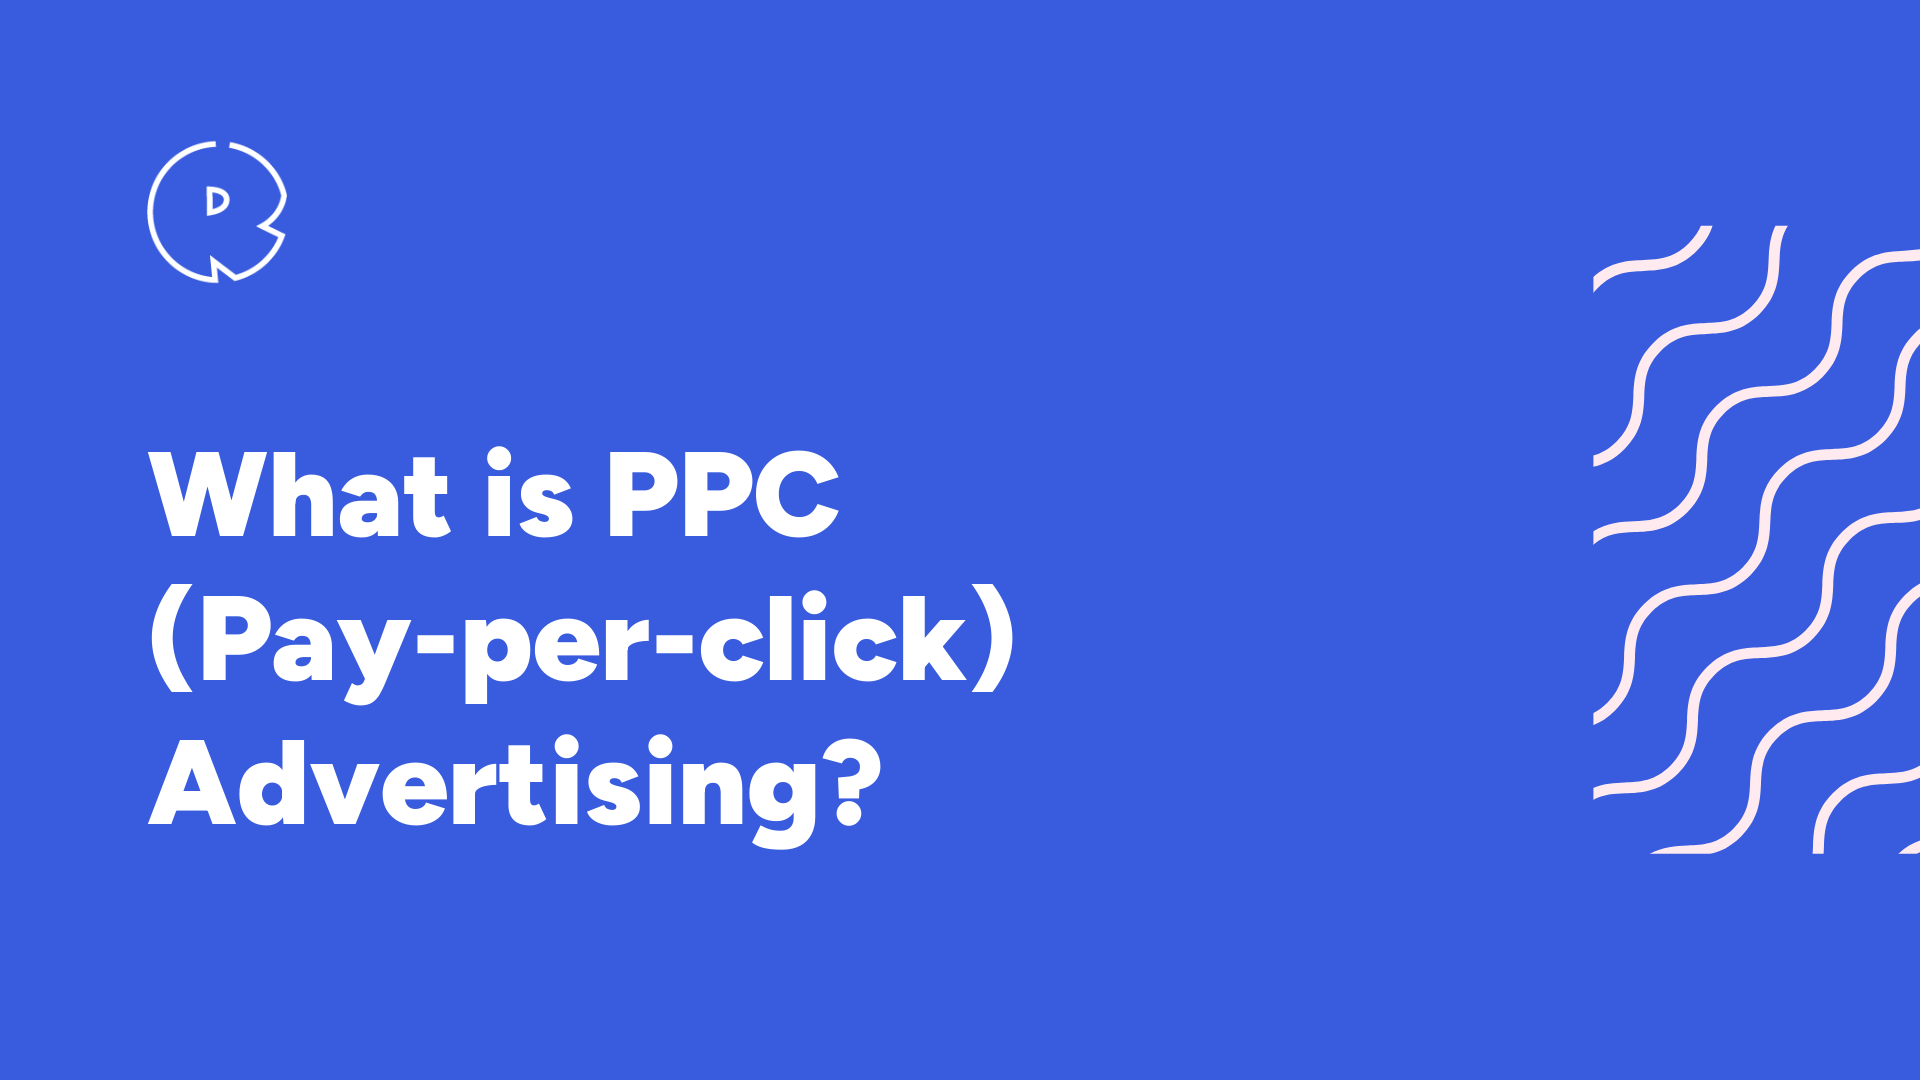 What is PPC (Pay-per-click) Advertising?